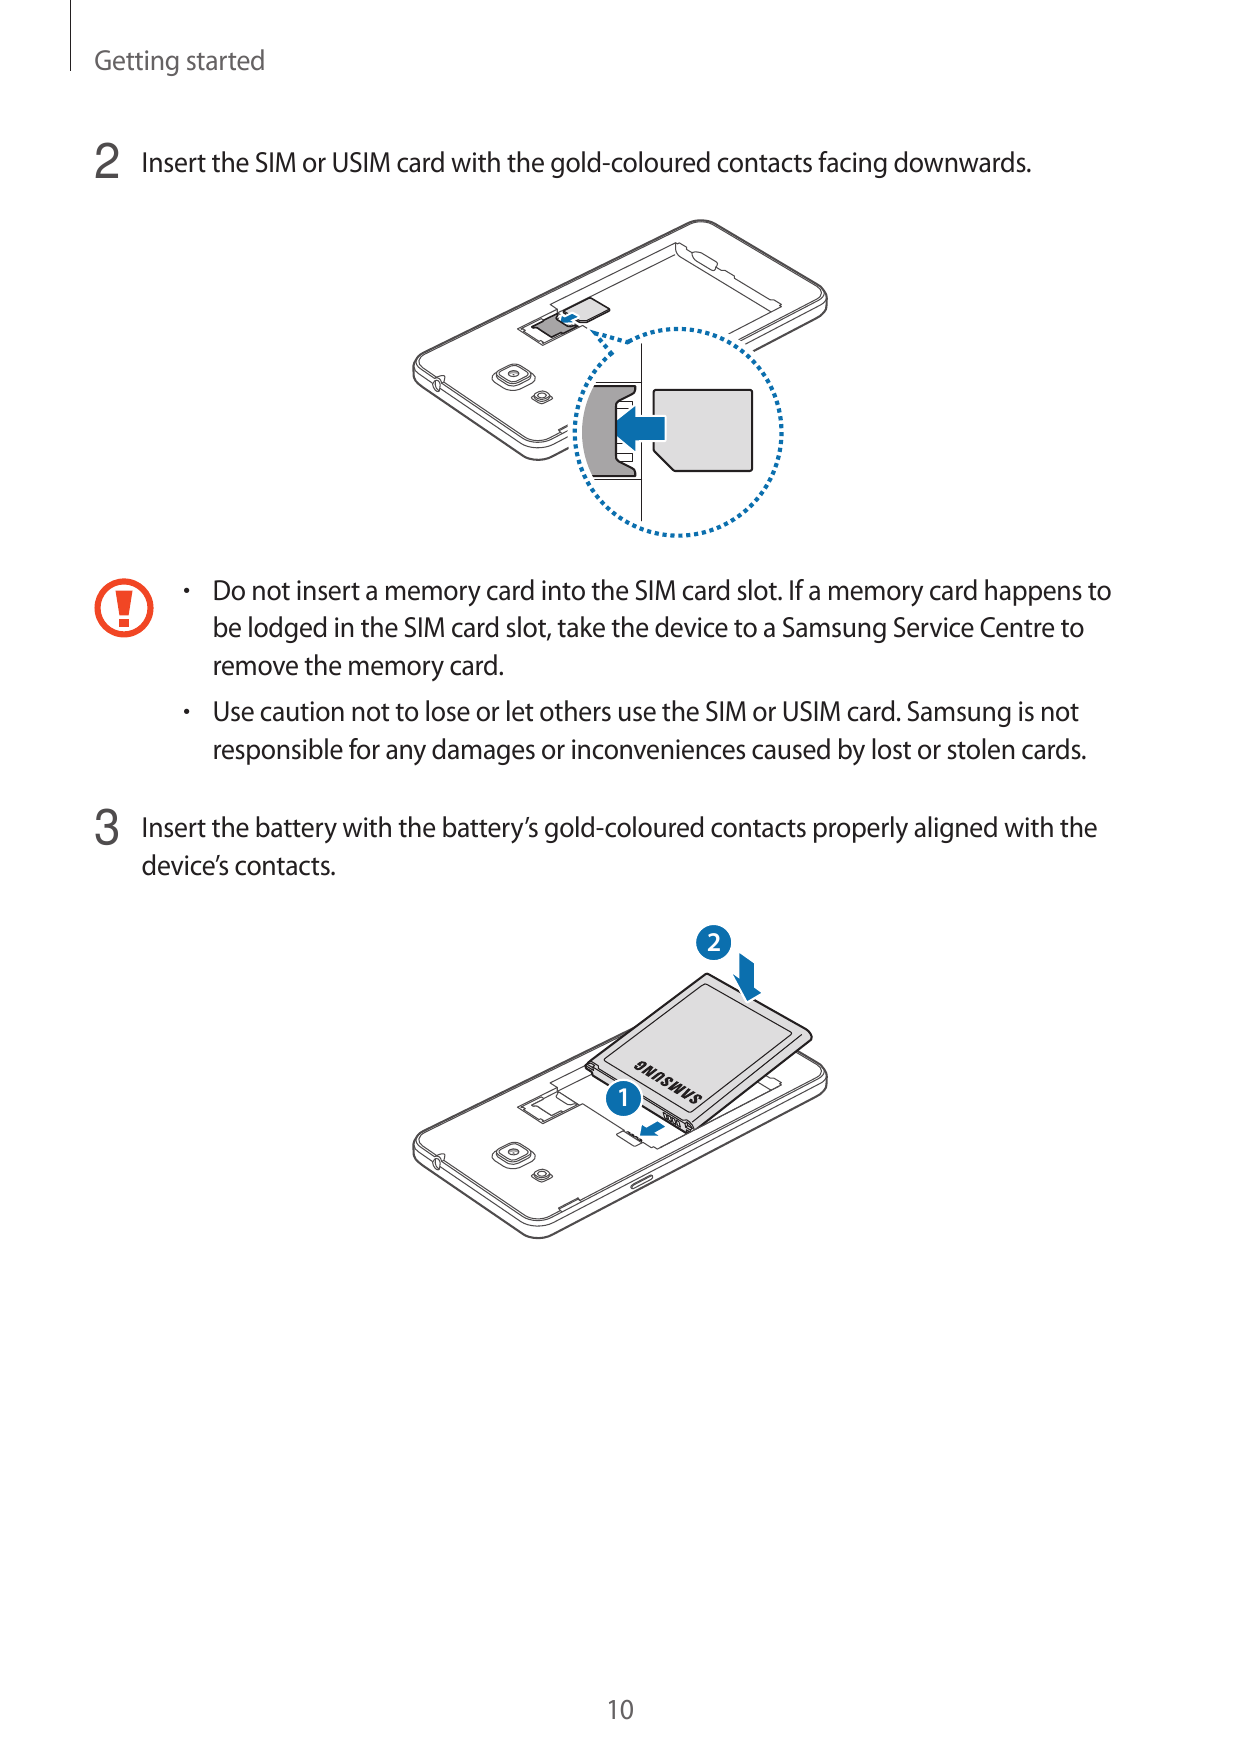 Getting started2 Insert the SIM or USIM card with the gold-coloured contacts facing downwards.• Do not insert a memory card into